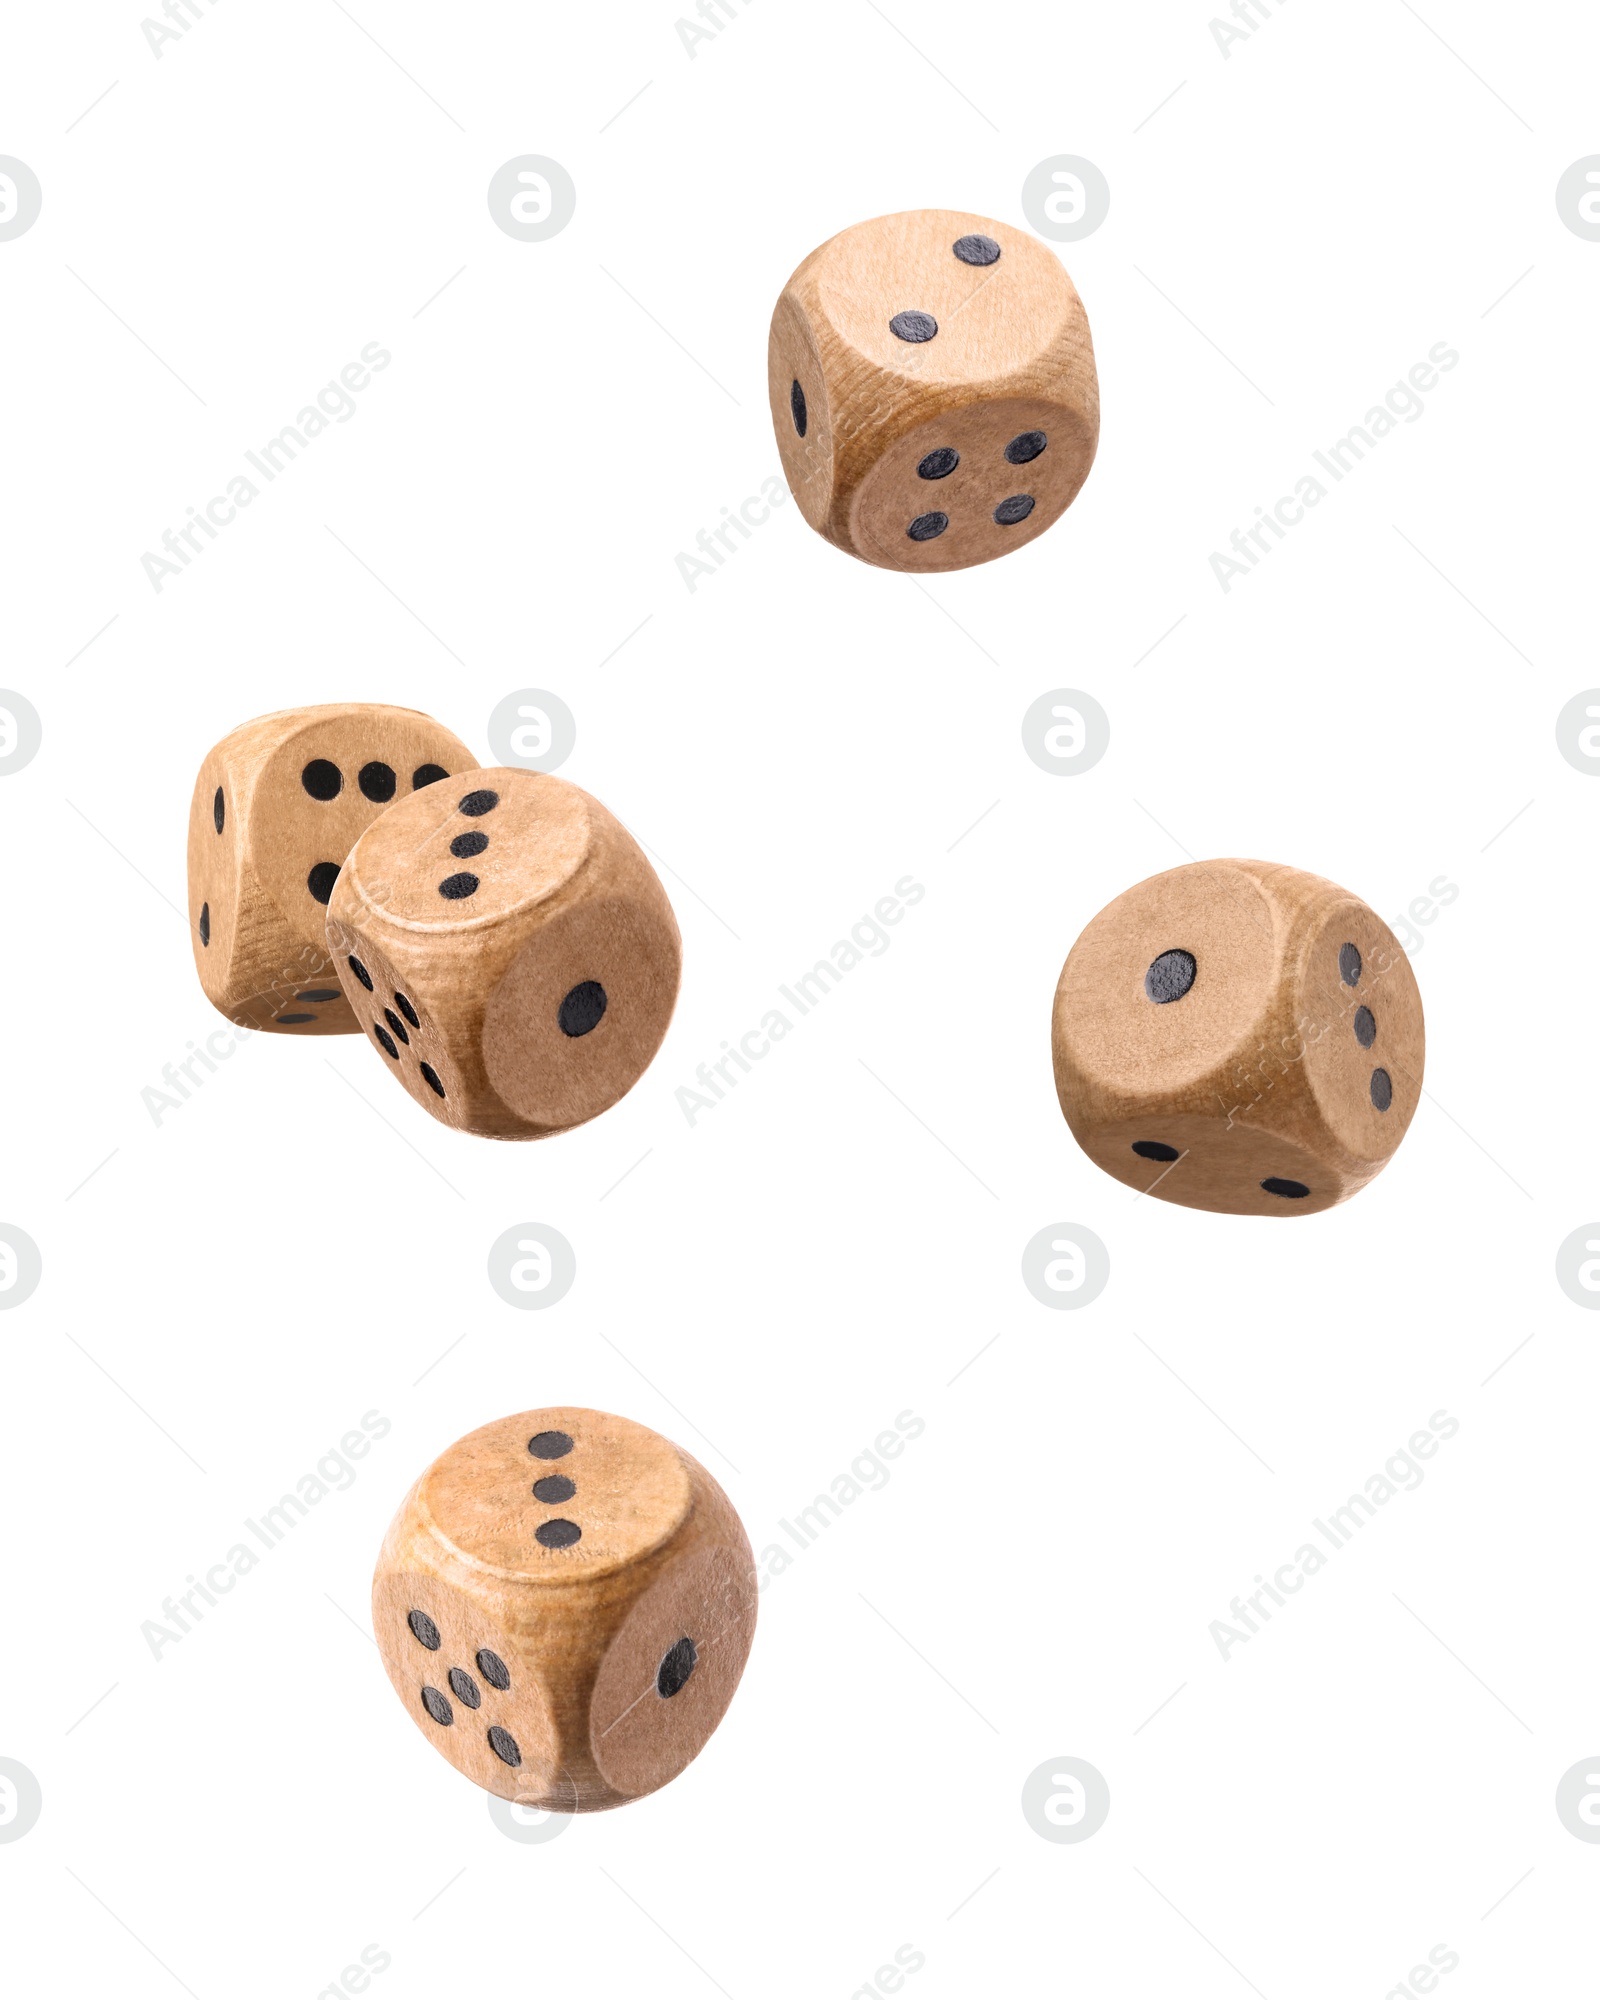 Image of Five wooden dice in air on white background